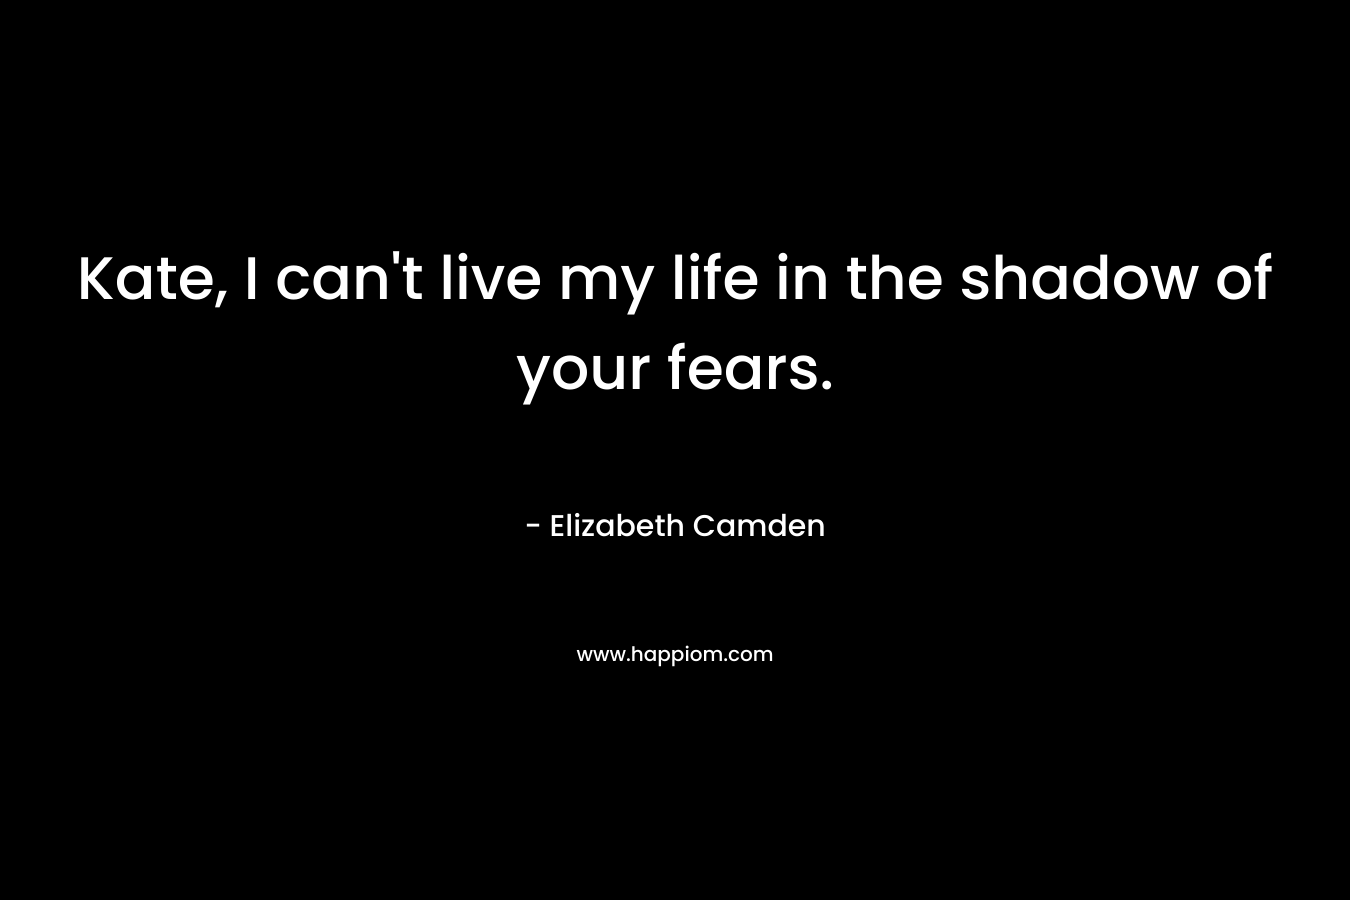 Kate, I can’t live my life in the shadow of your fears. – Elizabeth Camden